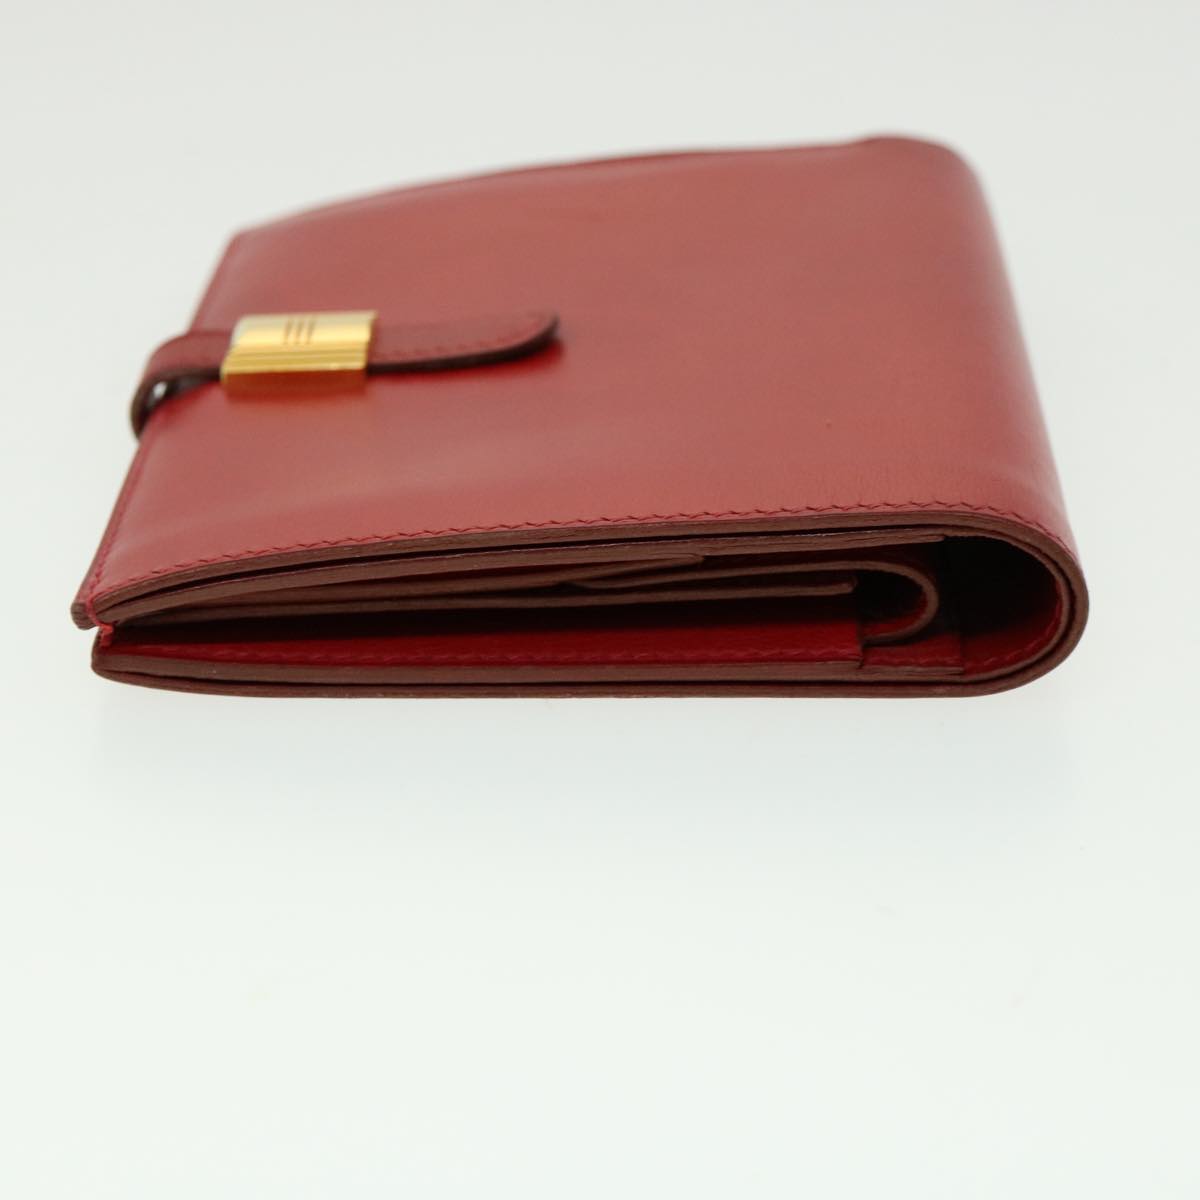 HERMES Saumur Diane Compact Wallet Leather Red Auth 30923